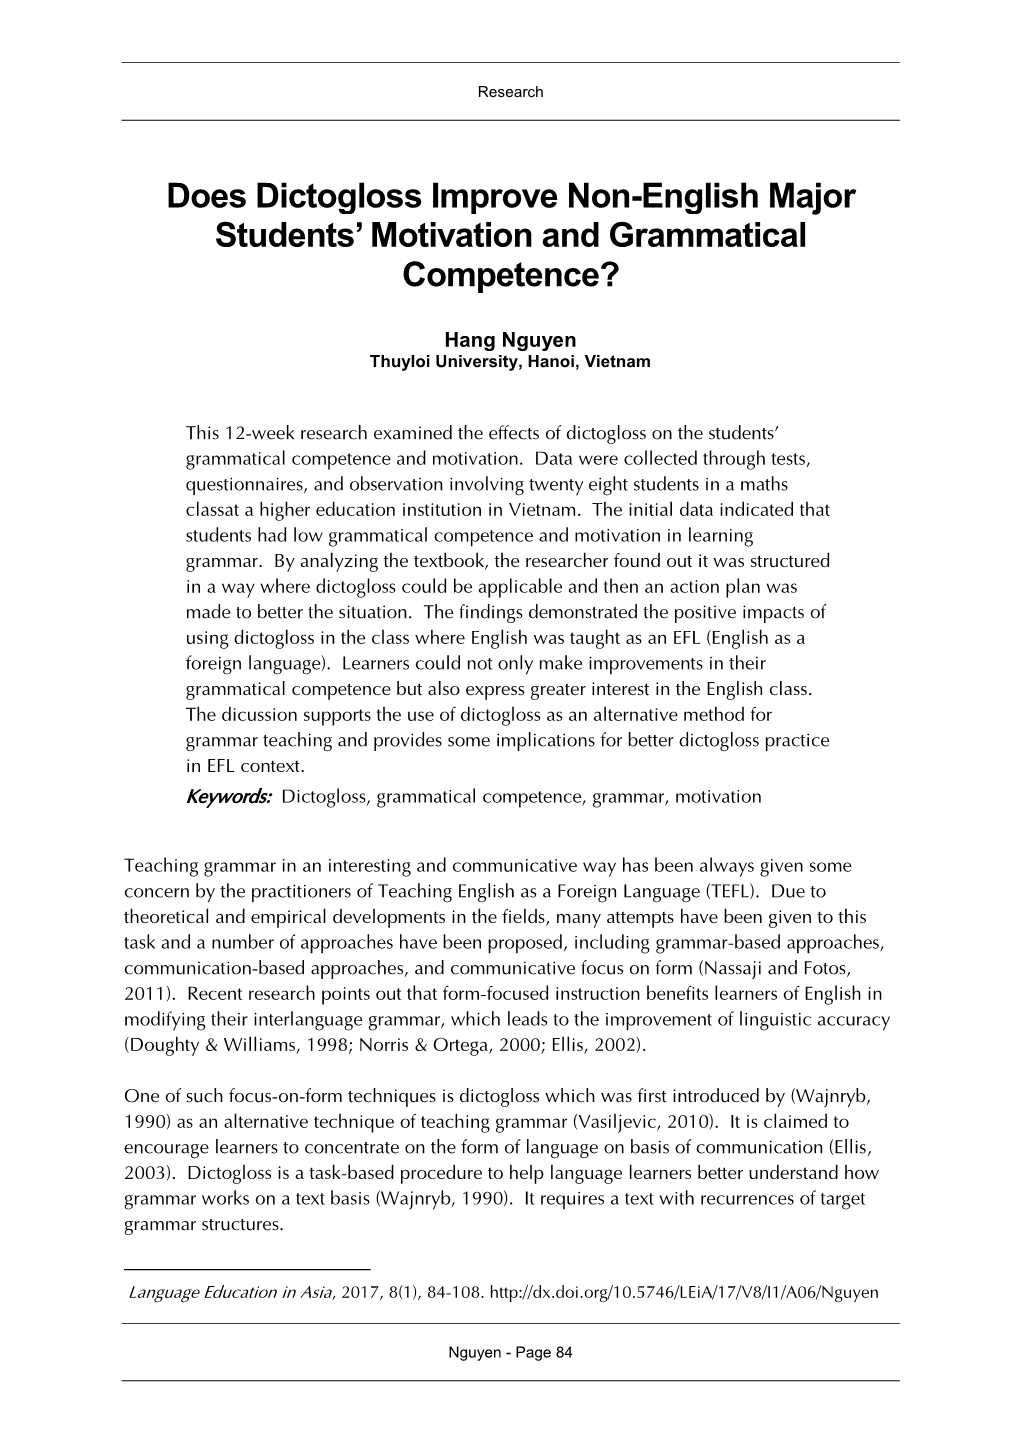 Does Dictogloss Improve Non-English Major Students’ Motivation and Grammatical Competence?